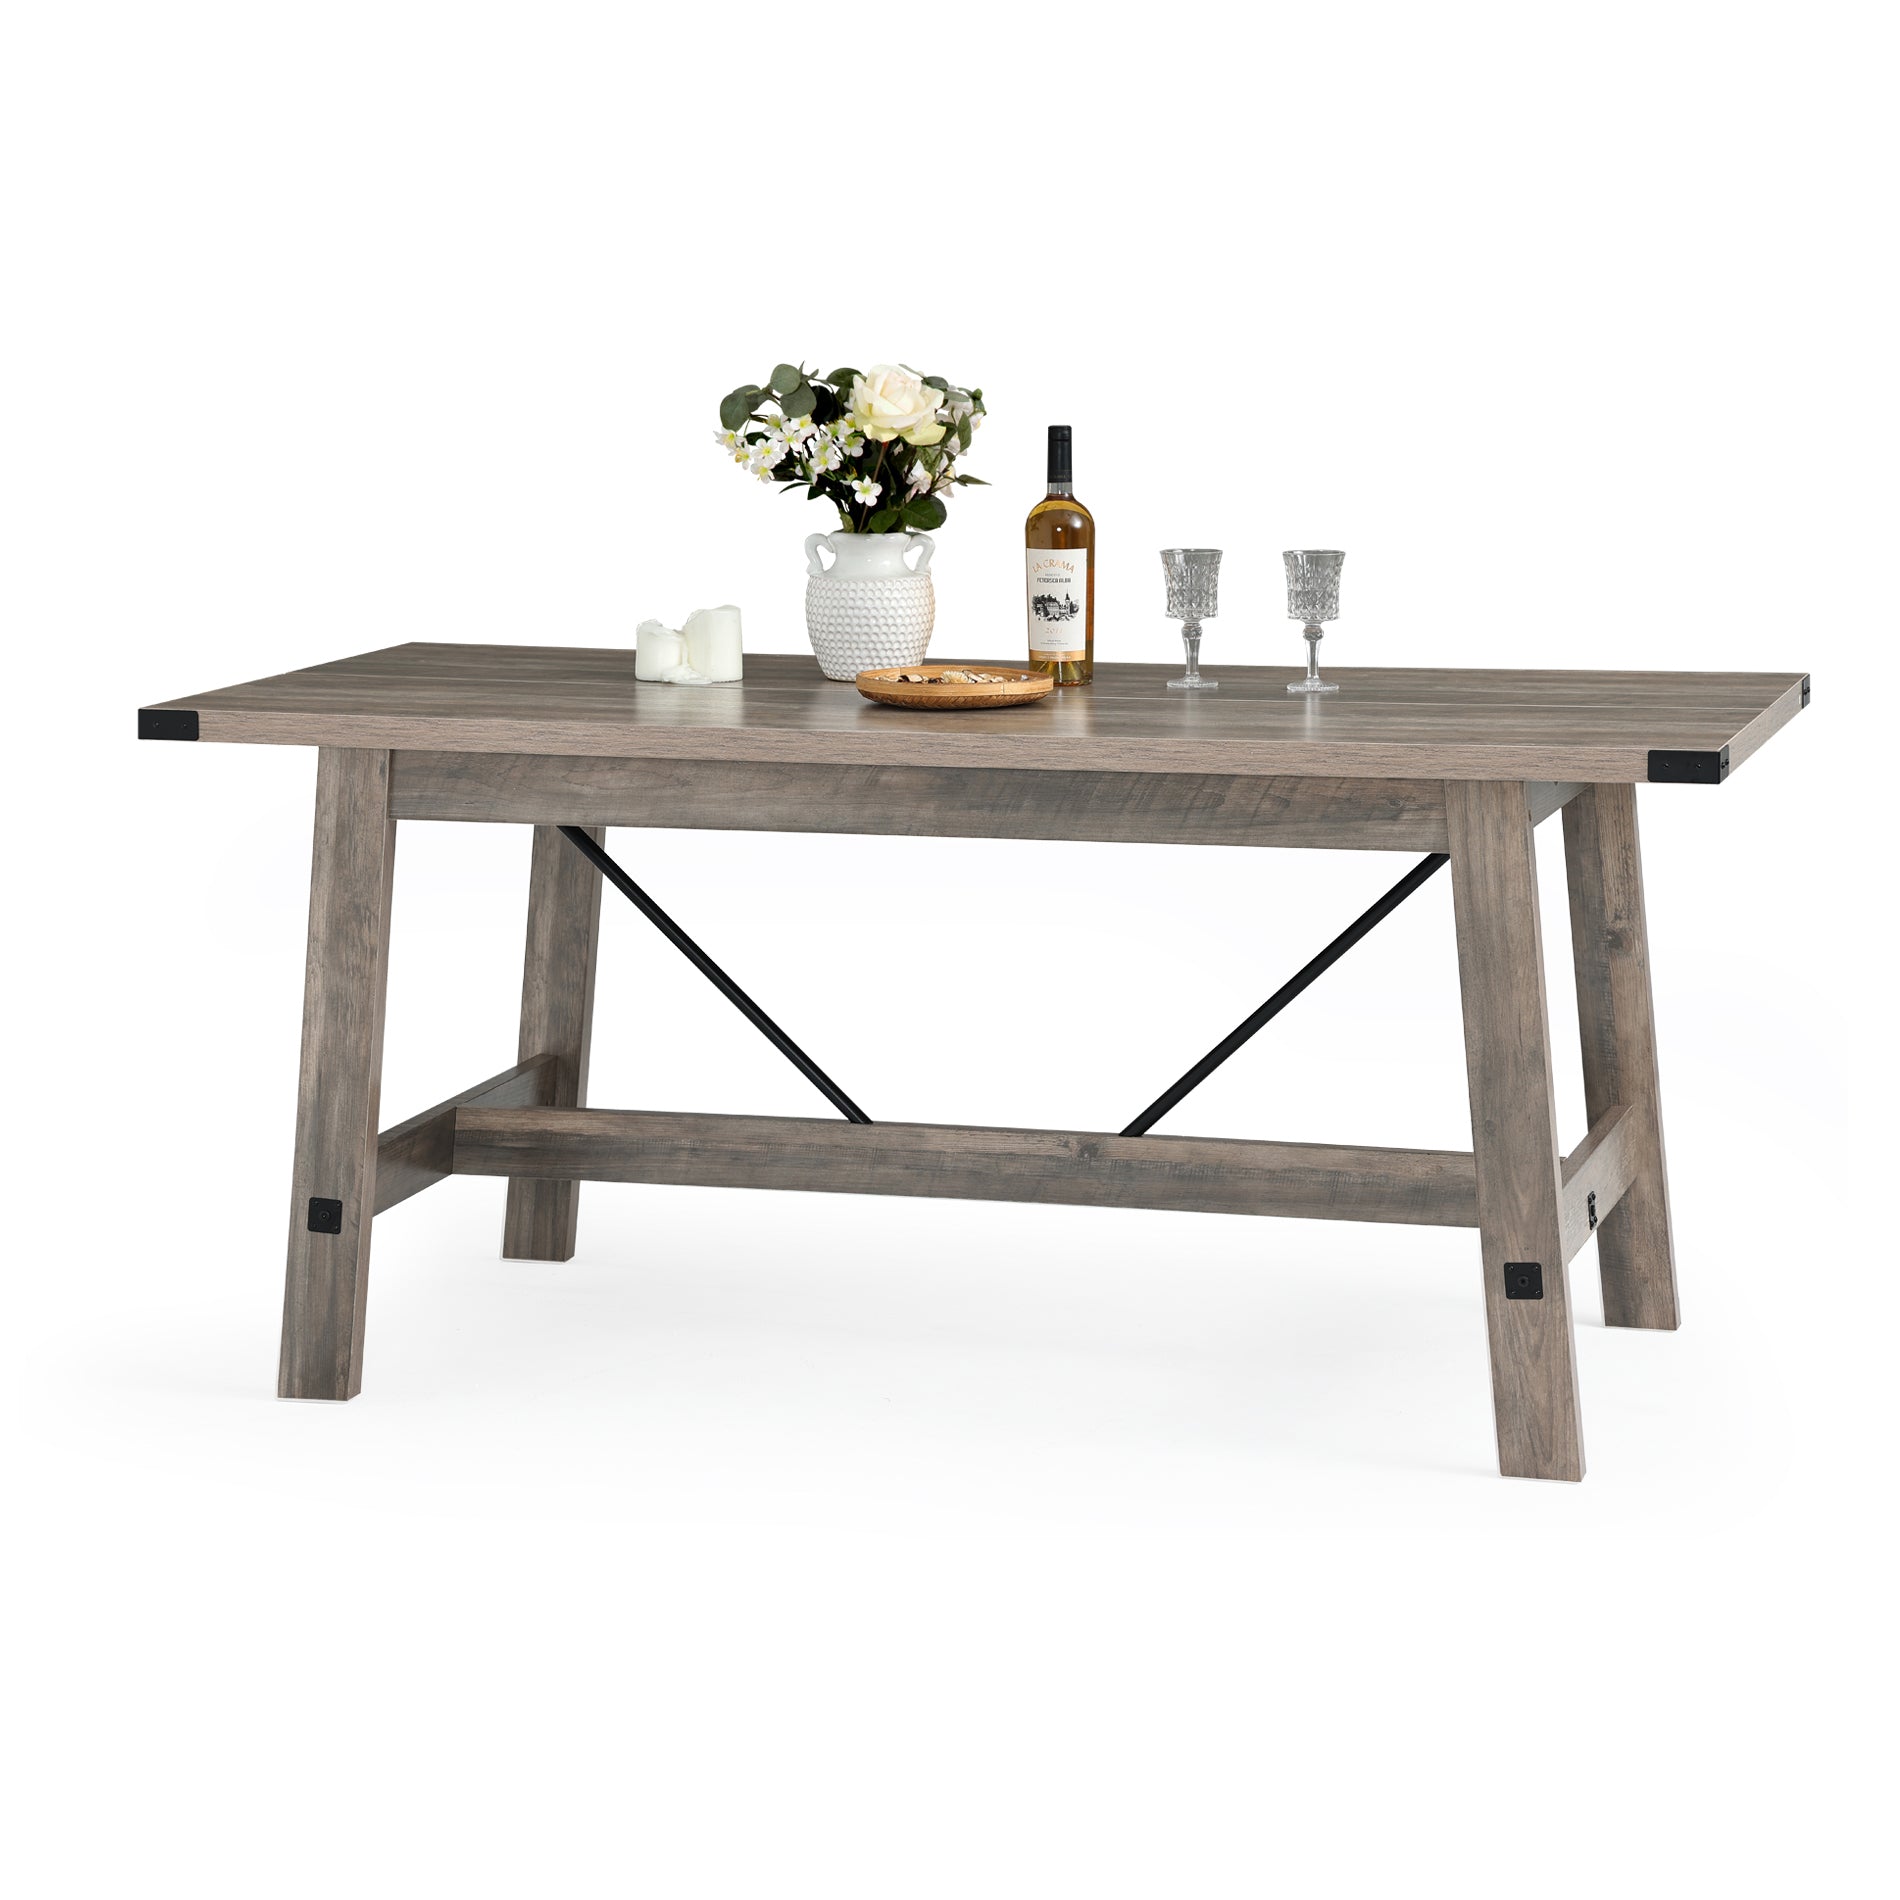 WAMPAT 67.7"  6 Person Modern Wood Dining Room Table, Rustic Grey